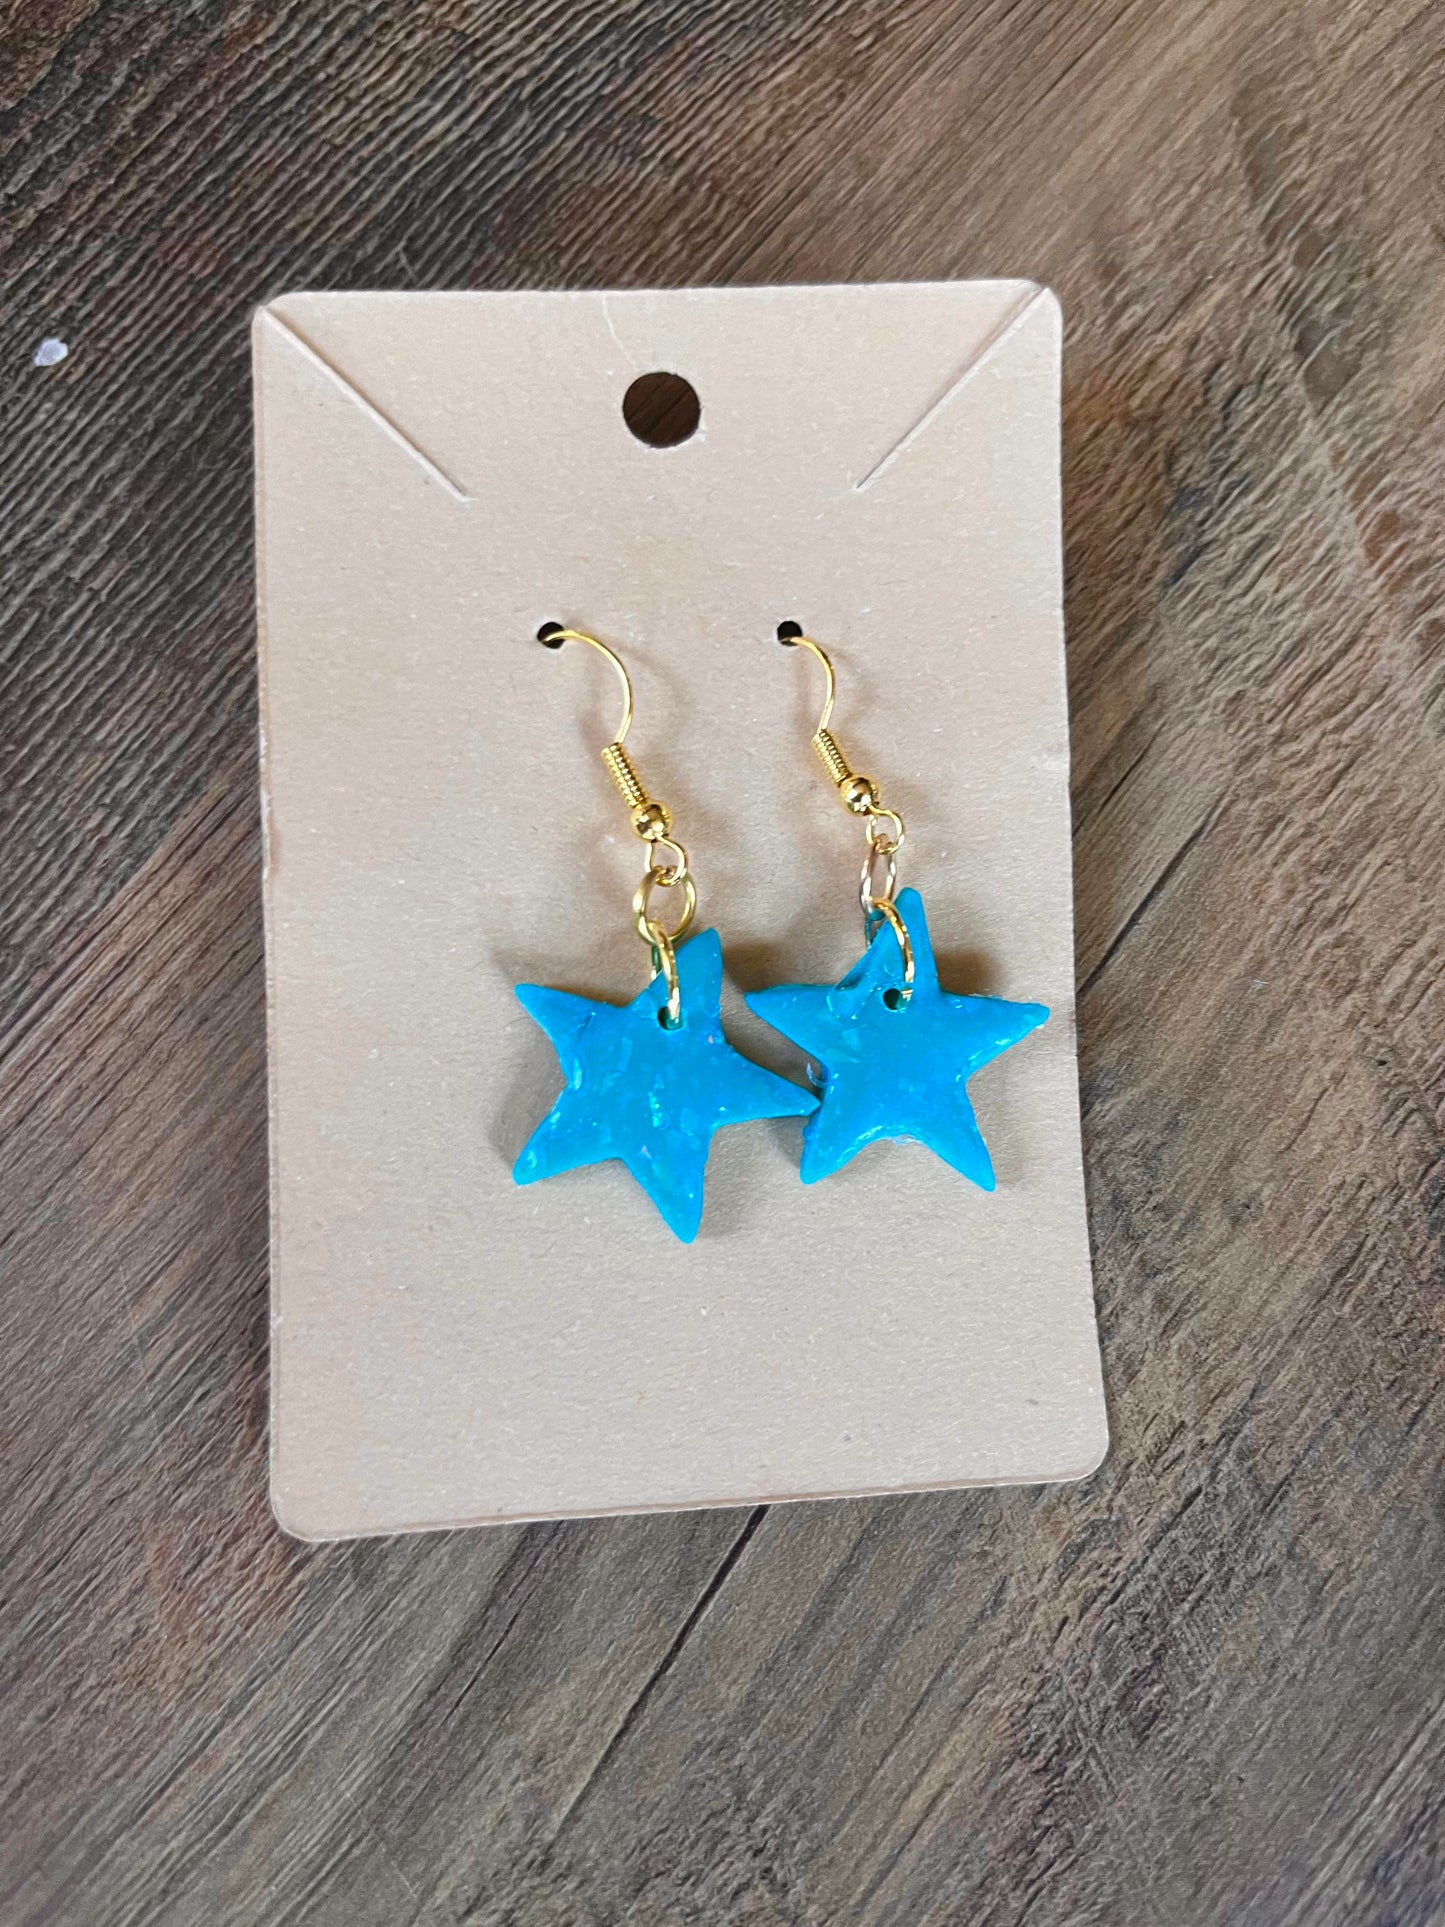 Clay Earrings in "Turquoise Shimmer" Design